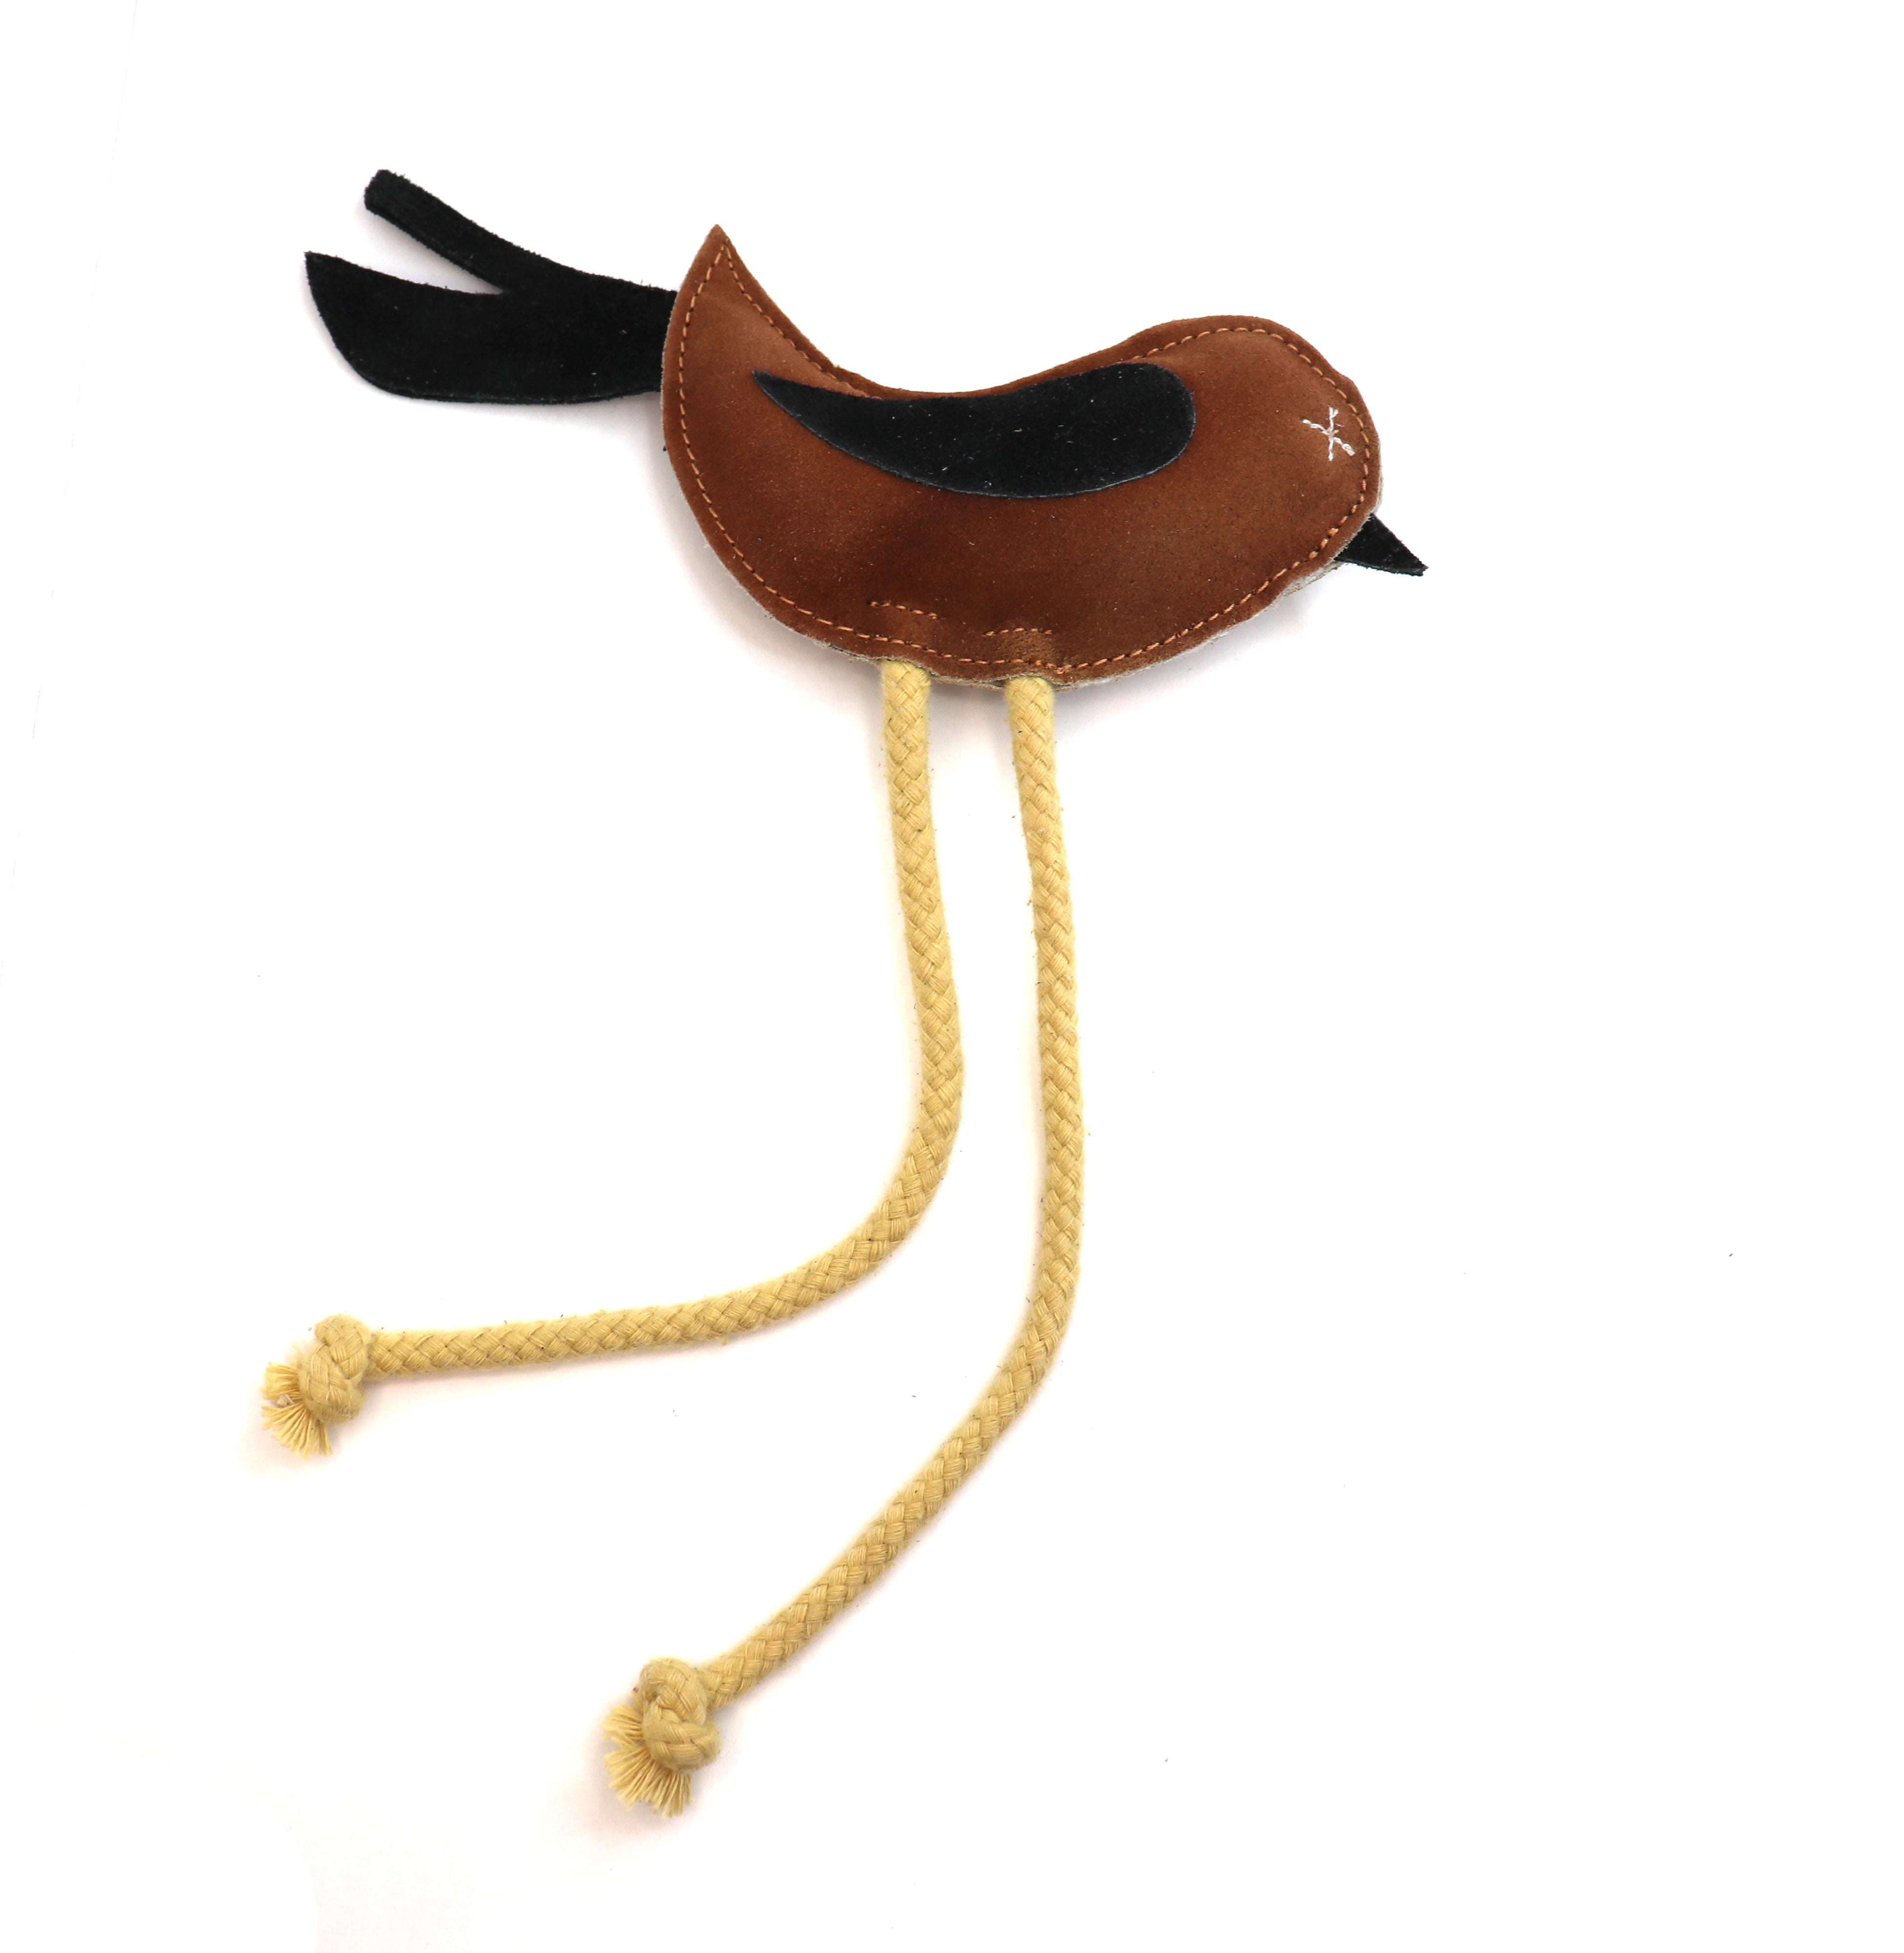 A handmade leather Birdy Toy - black + tan with enticing dangly rope legs and knotted ends isolated on a white background by Georgie Paws.